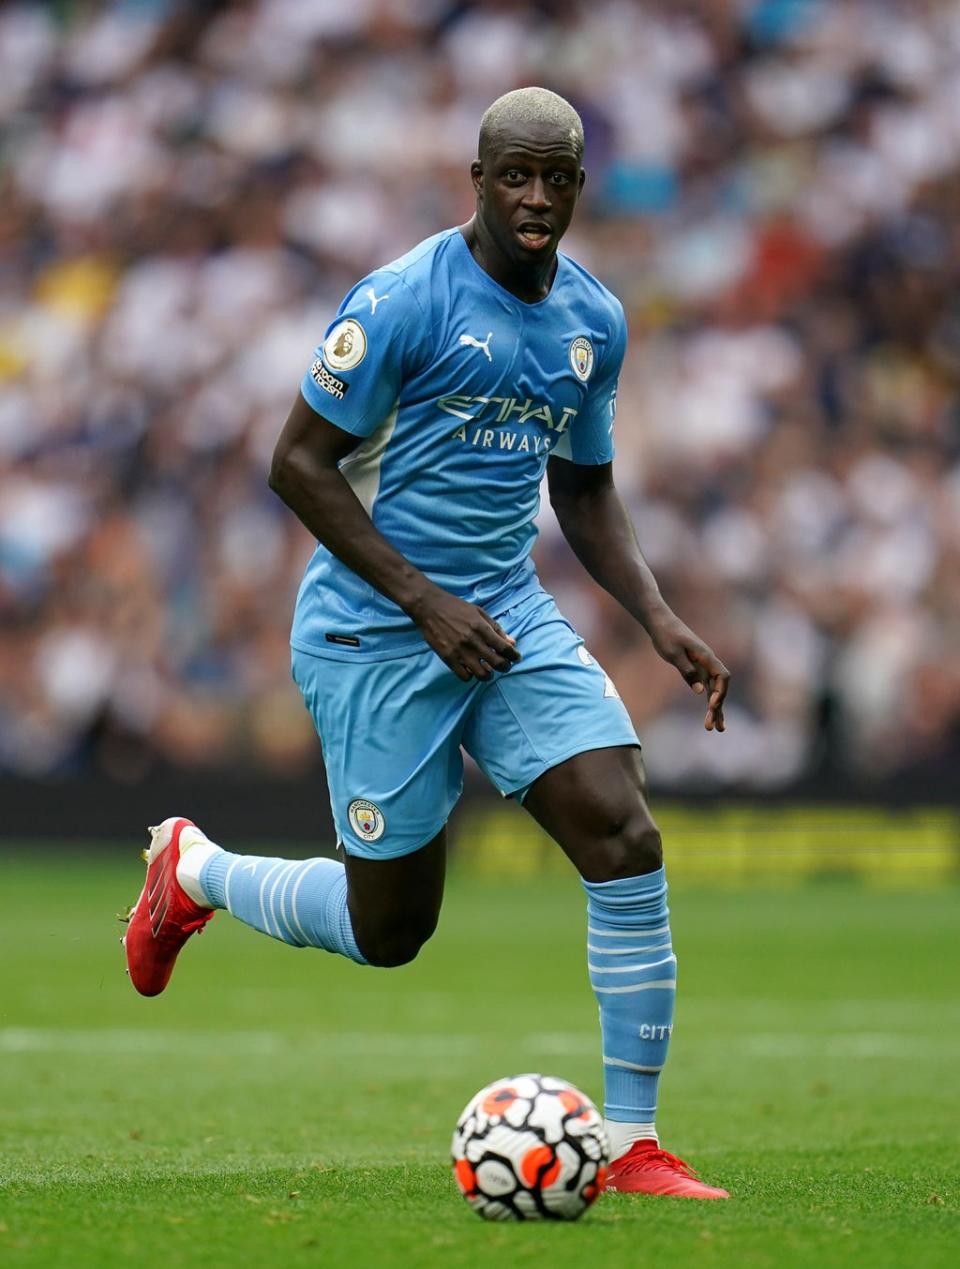 Mendy has played for Manchester City since 2017, when he joined from Monaco for a reported £52 million (PA) (PA Wire)